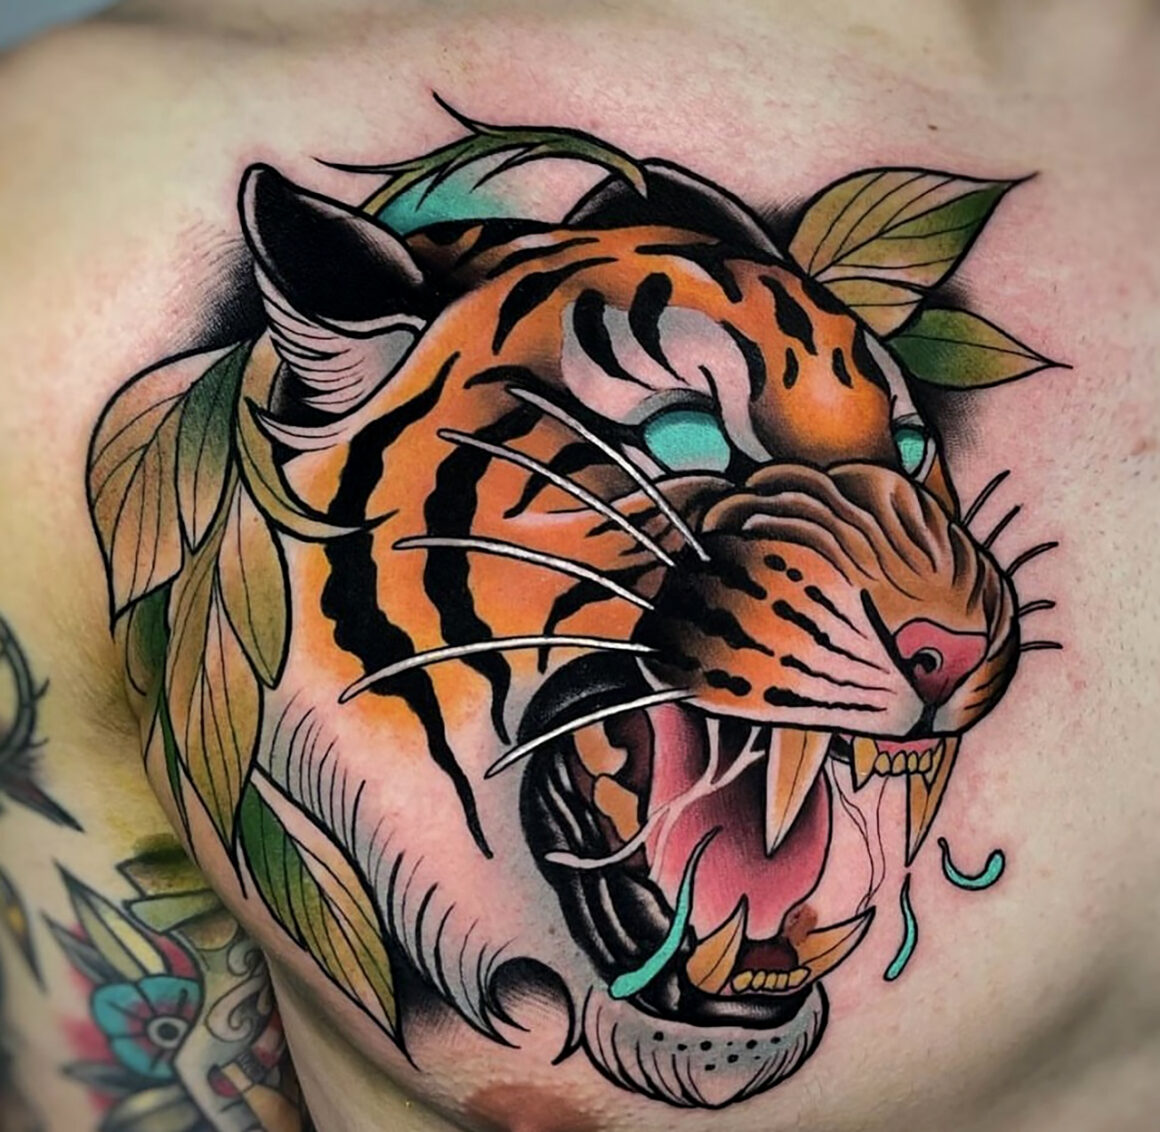 Tattoo by Luan Roots, @luanroots